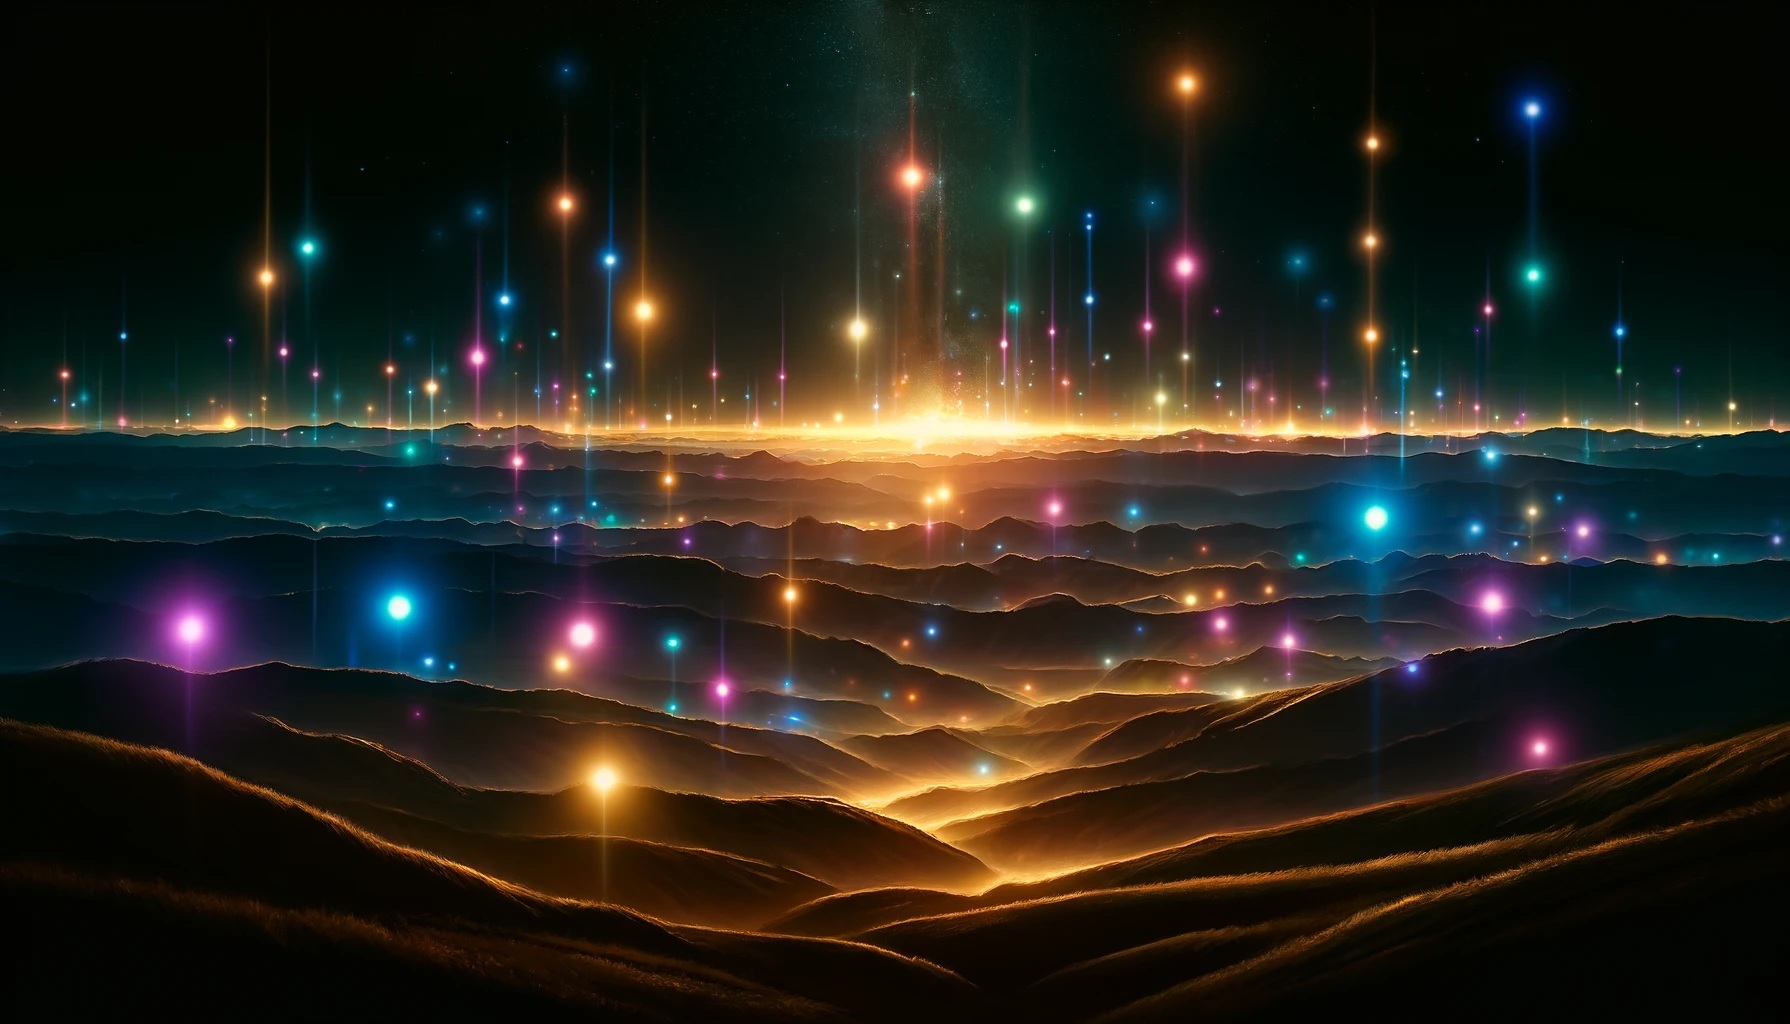 A mystical and enhanced rendition of the Brown Mountain Lights at night. The image showcases a range of vibrant, glowing orbs scattered across a panoramic landscape. These orbs emit a variety of colors and illuminate the night sky and the outlines of the rolling hills. The scene is devoid of any human-made light sources and bathed in a supernatural glow, emphasizing the enigmatic nature of the phenomenon.